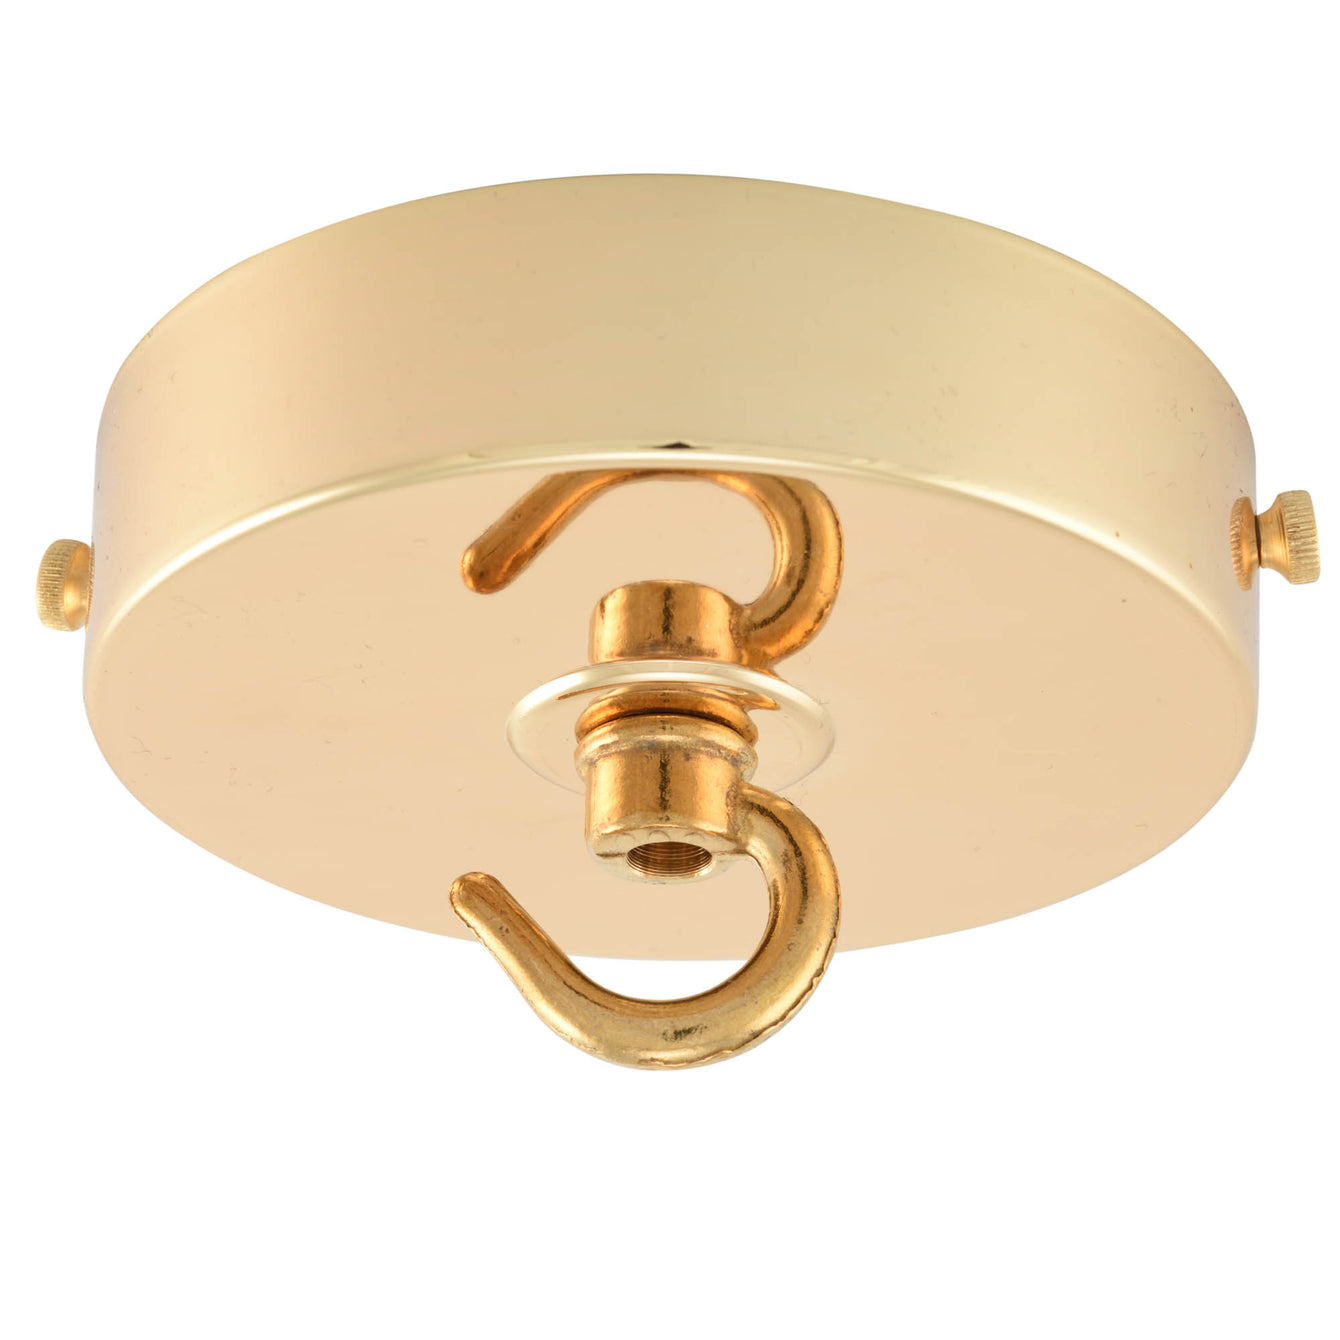 ElekTek 100mm Diameter Flat Top Ceiling Rose with Strap Bracket and Hook Metallic Finishes Powder Coated Colours Antique Brass